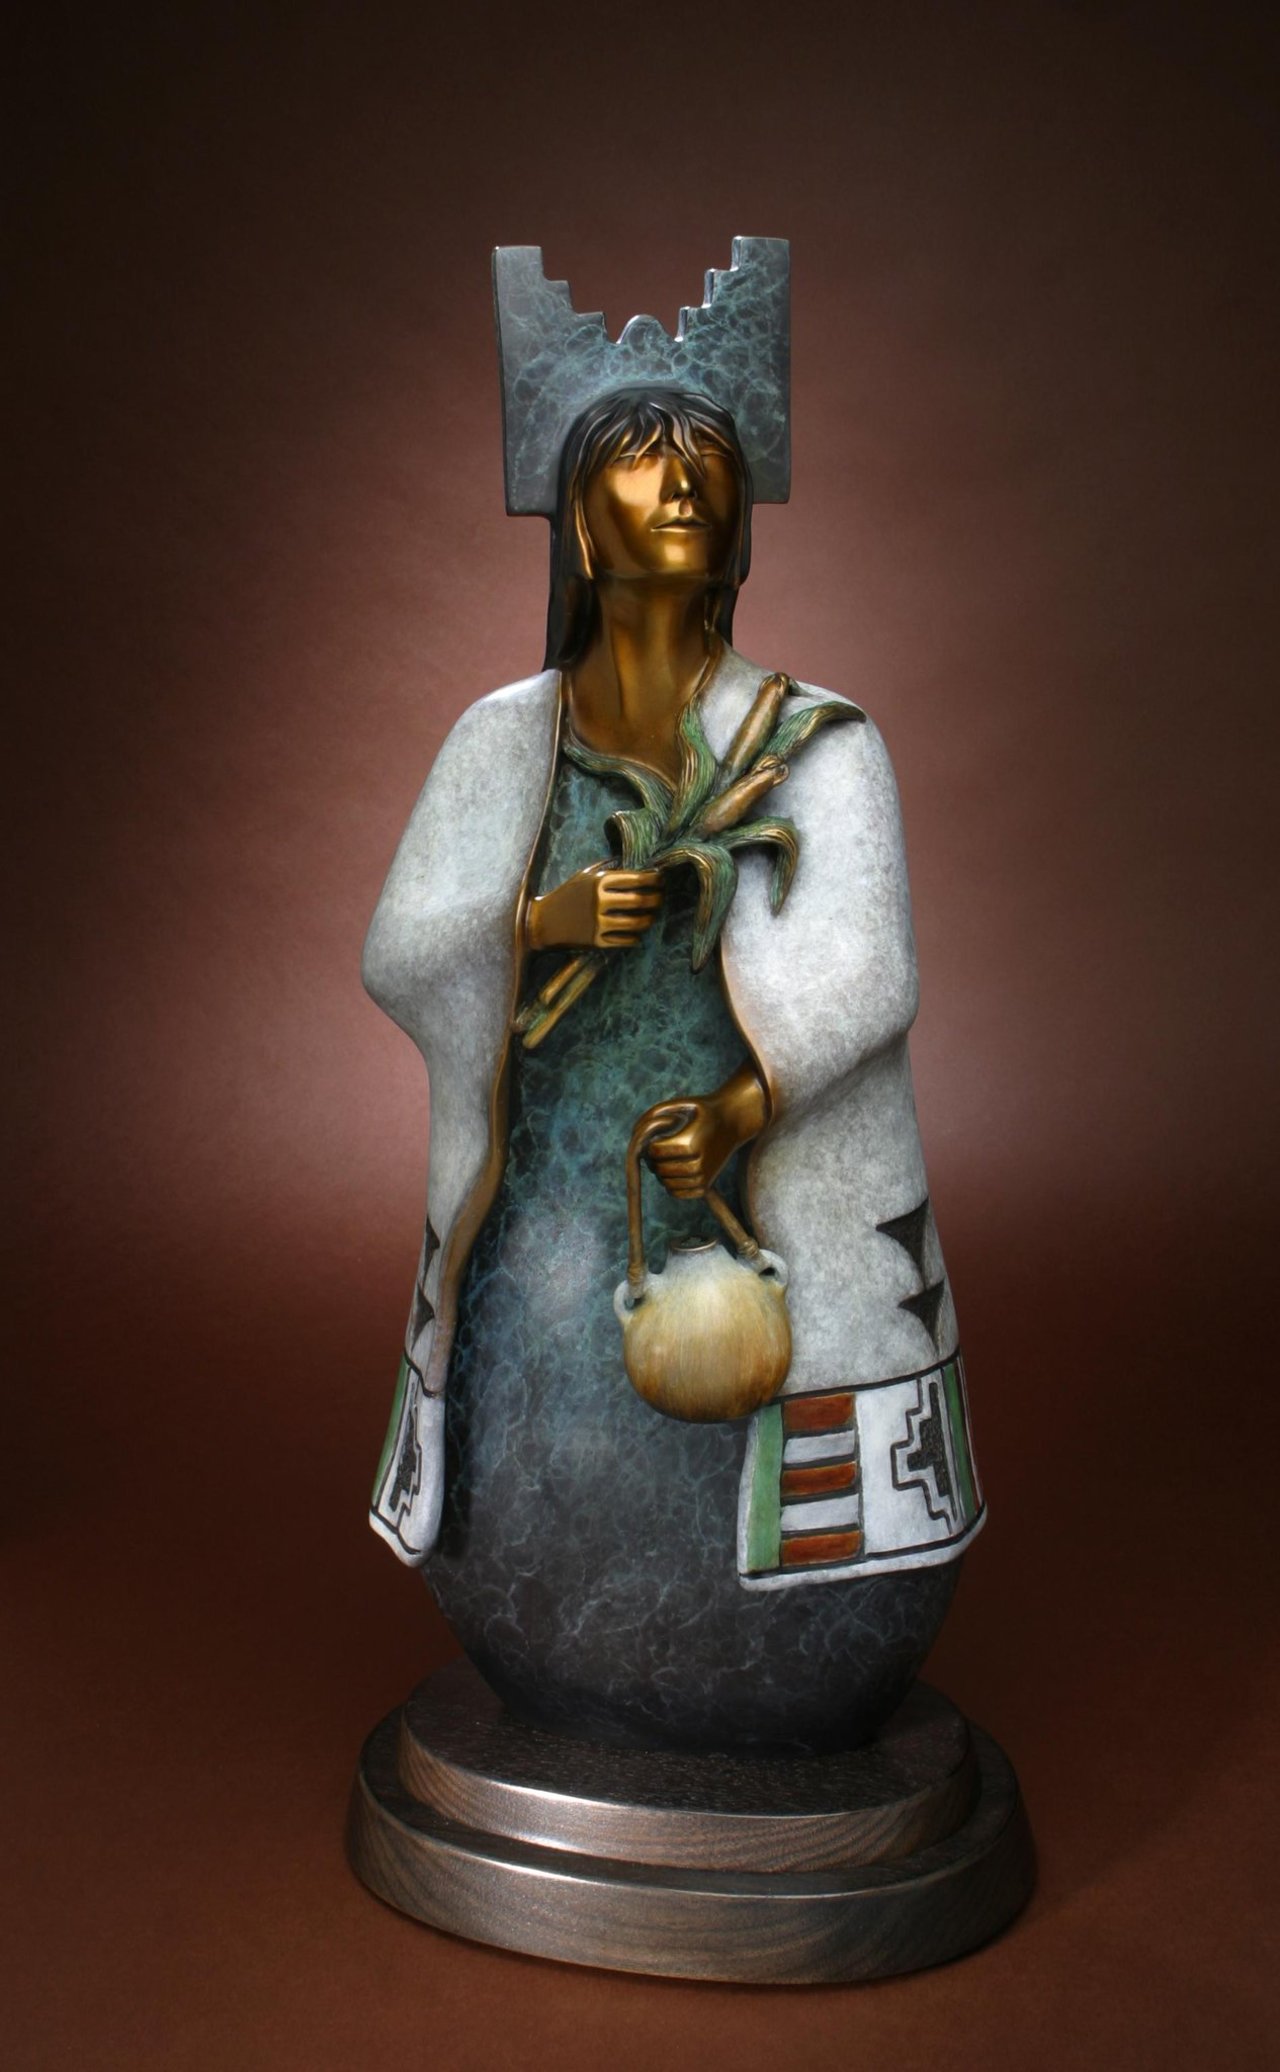 We love the details and patina of this piece by C Carpio! "Keeper of #Hope"23 x 10 x 6.75" 
#WomenInArtWednesday #Art http://t.co/sQjTmmjWT2